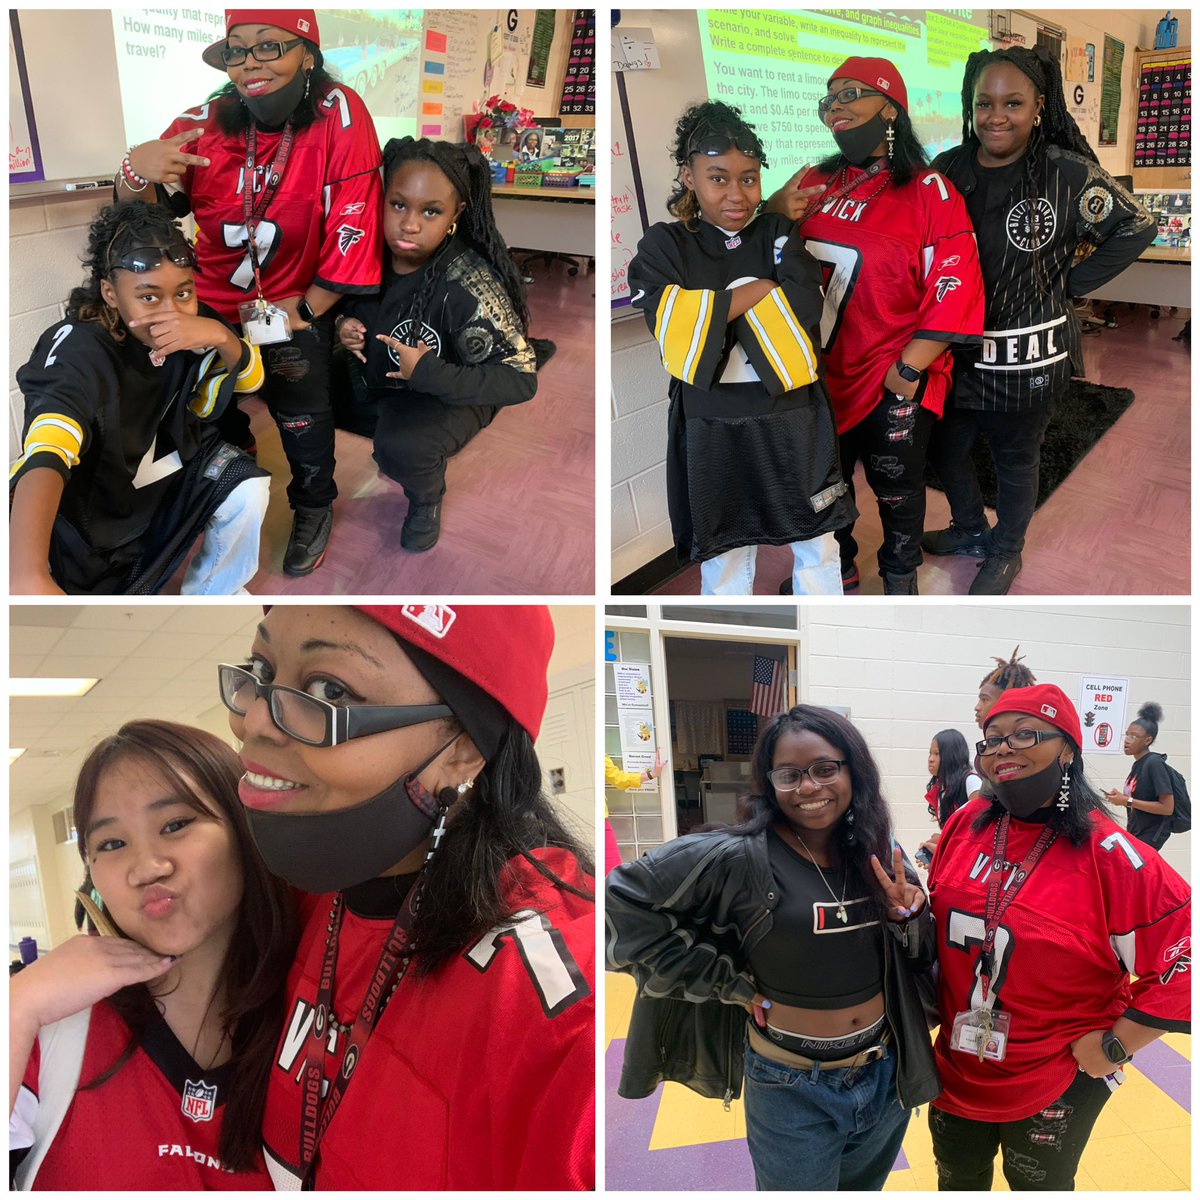 Teachers and students bonding and having a blast during Homecoming week. #DecadesDay #Homecoming2023 #WinningforKids #BuildingRelationships